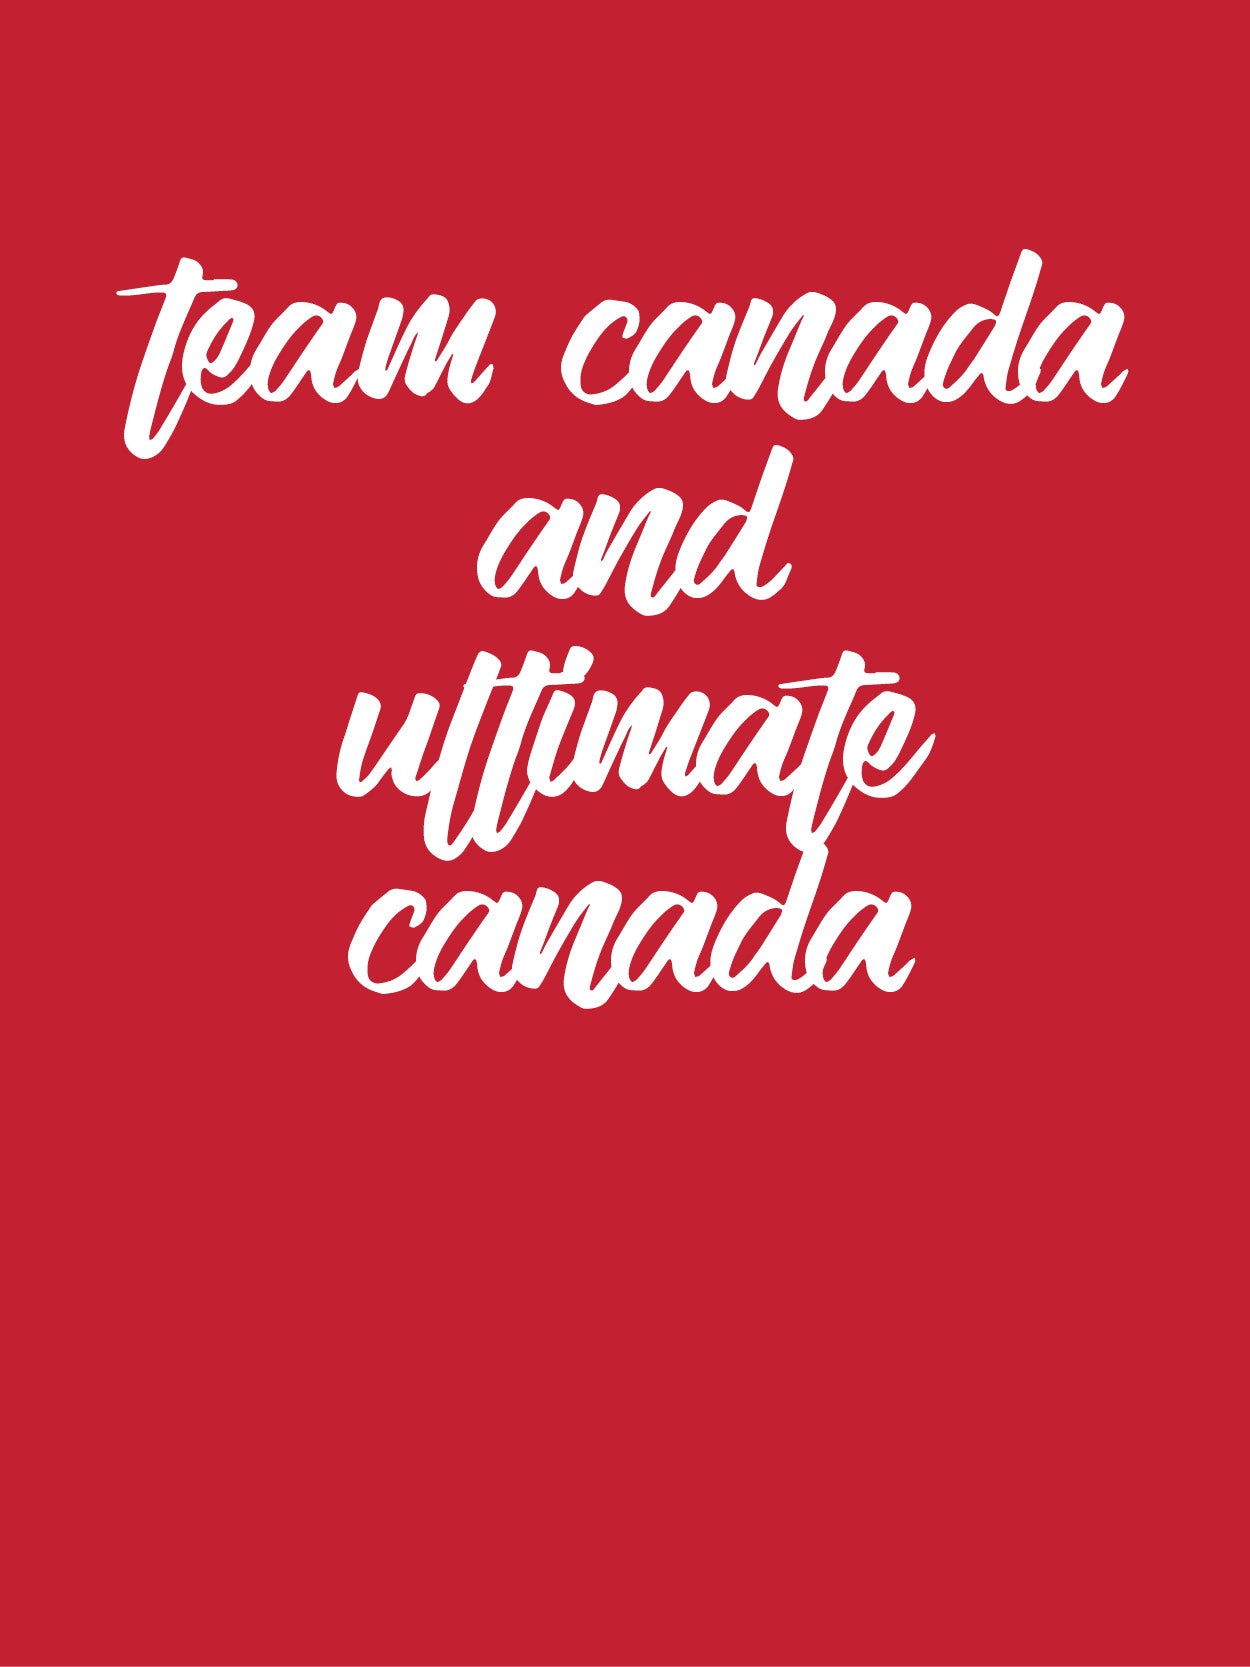 Team Canada: Getting to Know the World Games Players